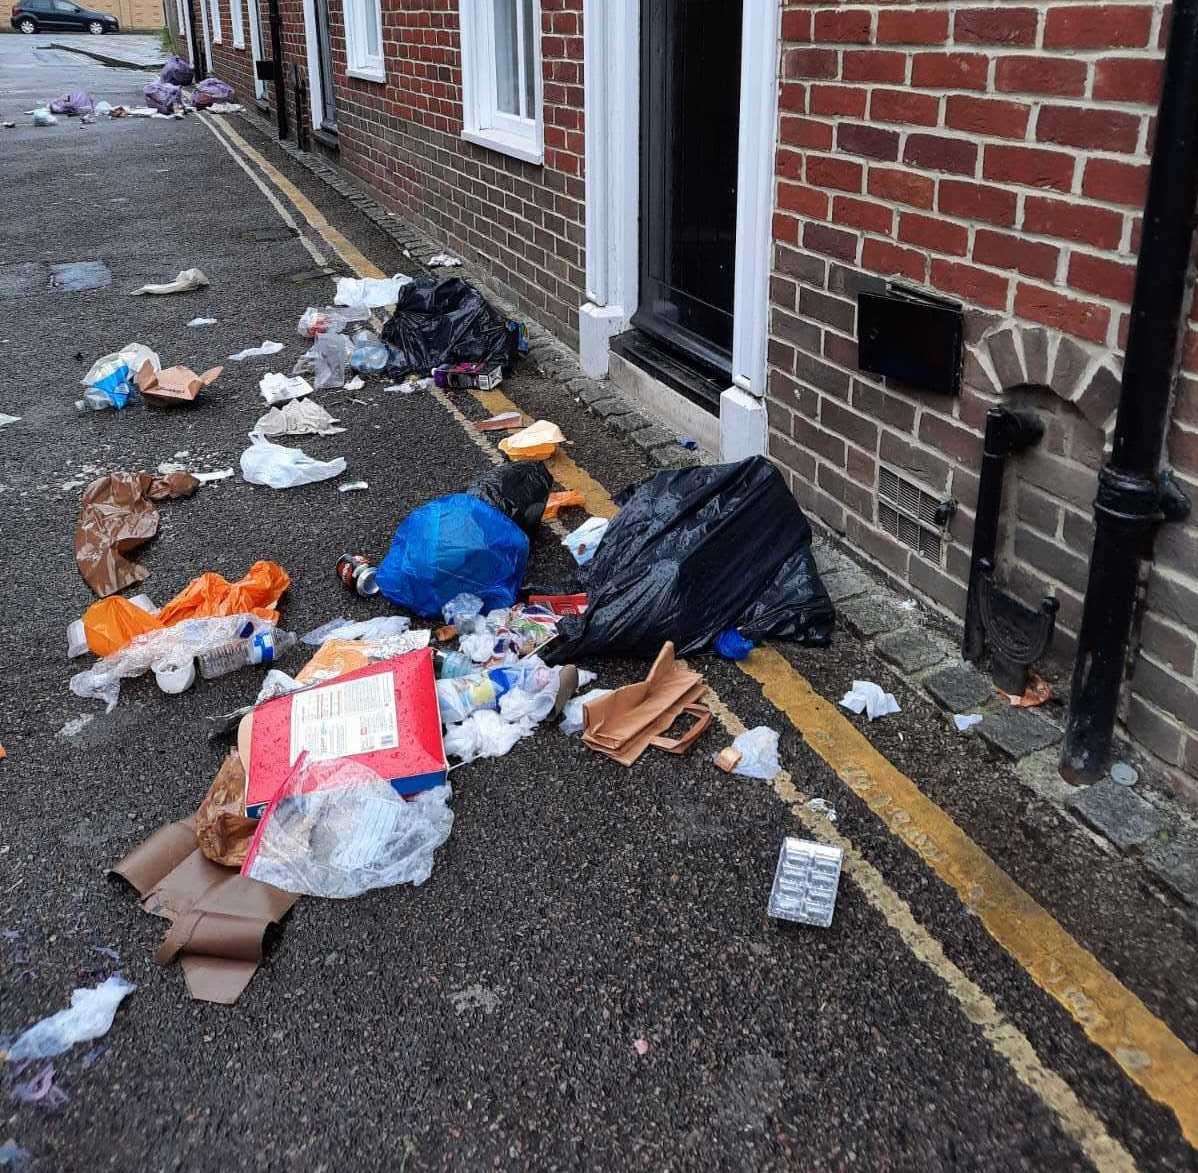 Waste strewn across the road is a common sight. Picture: Pat Gorman